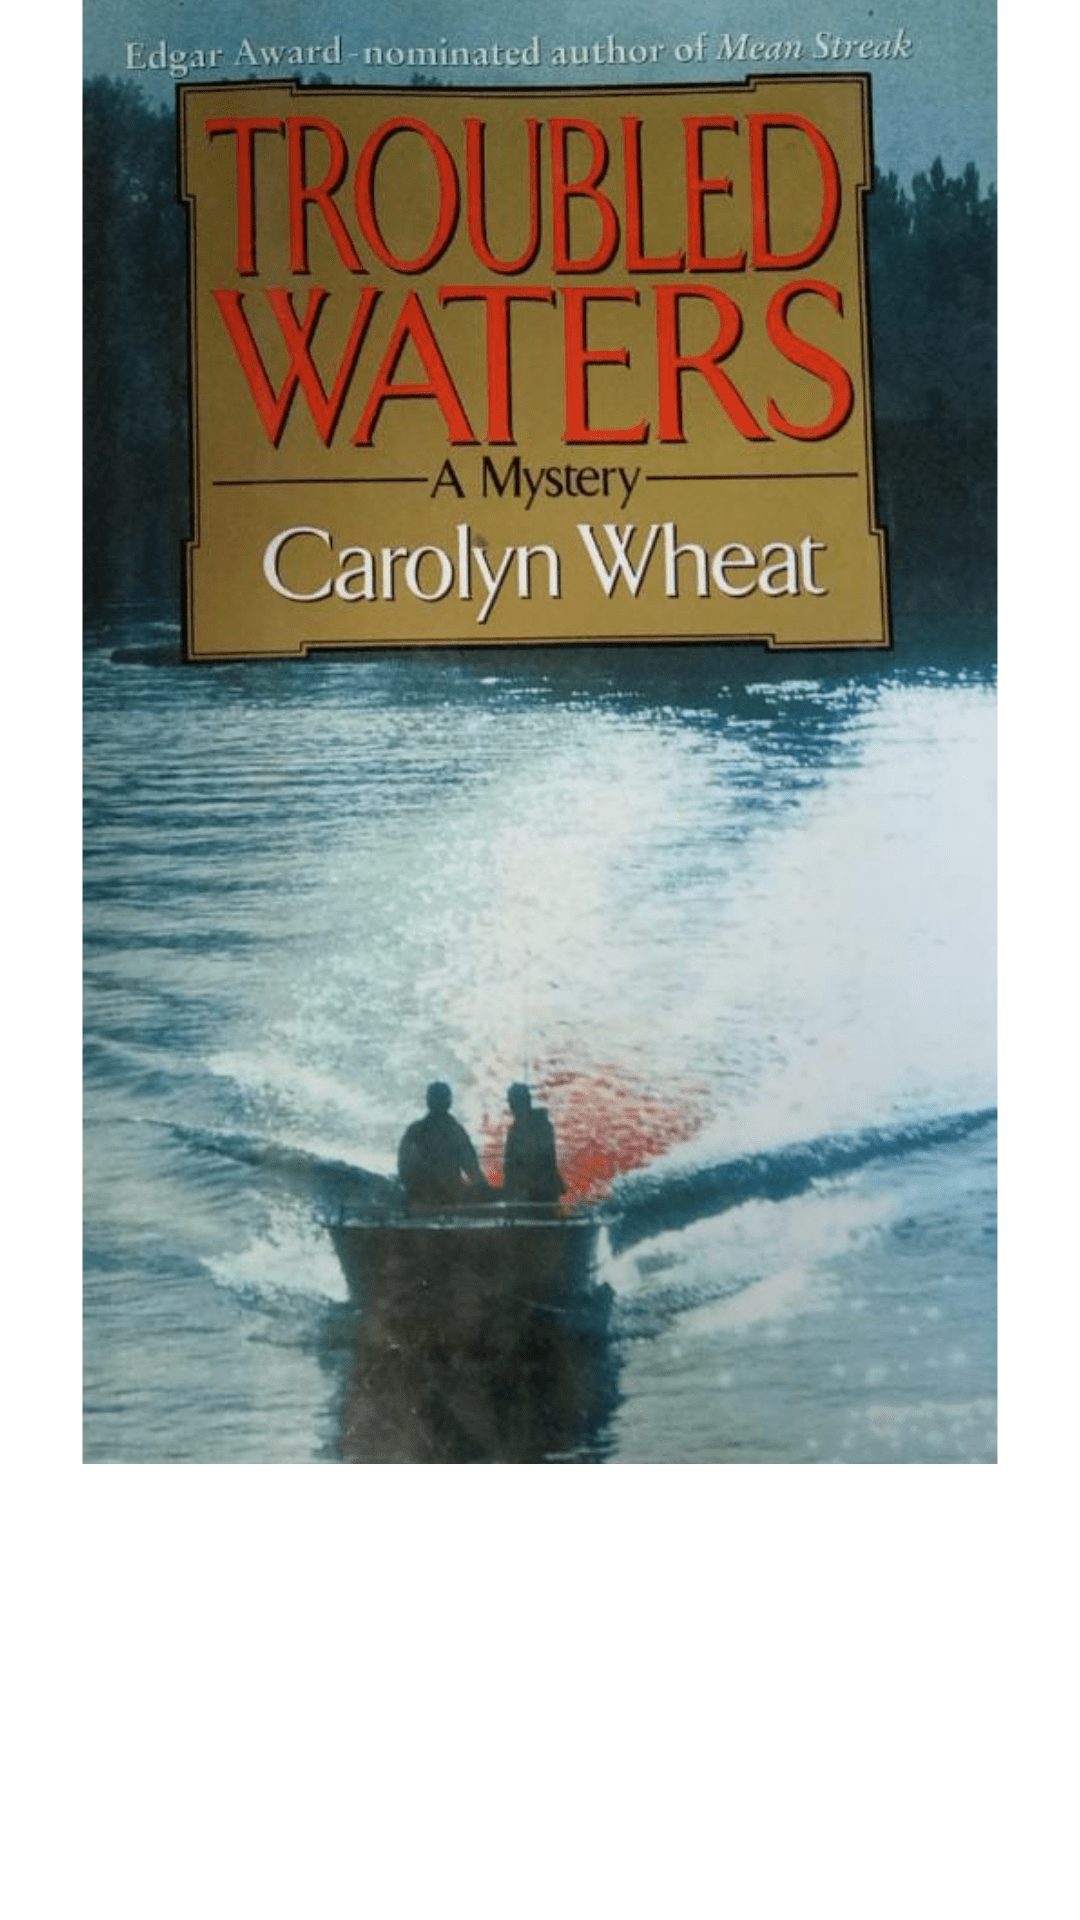 Troubled Waters by Carolyn Wheat